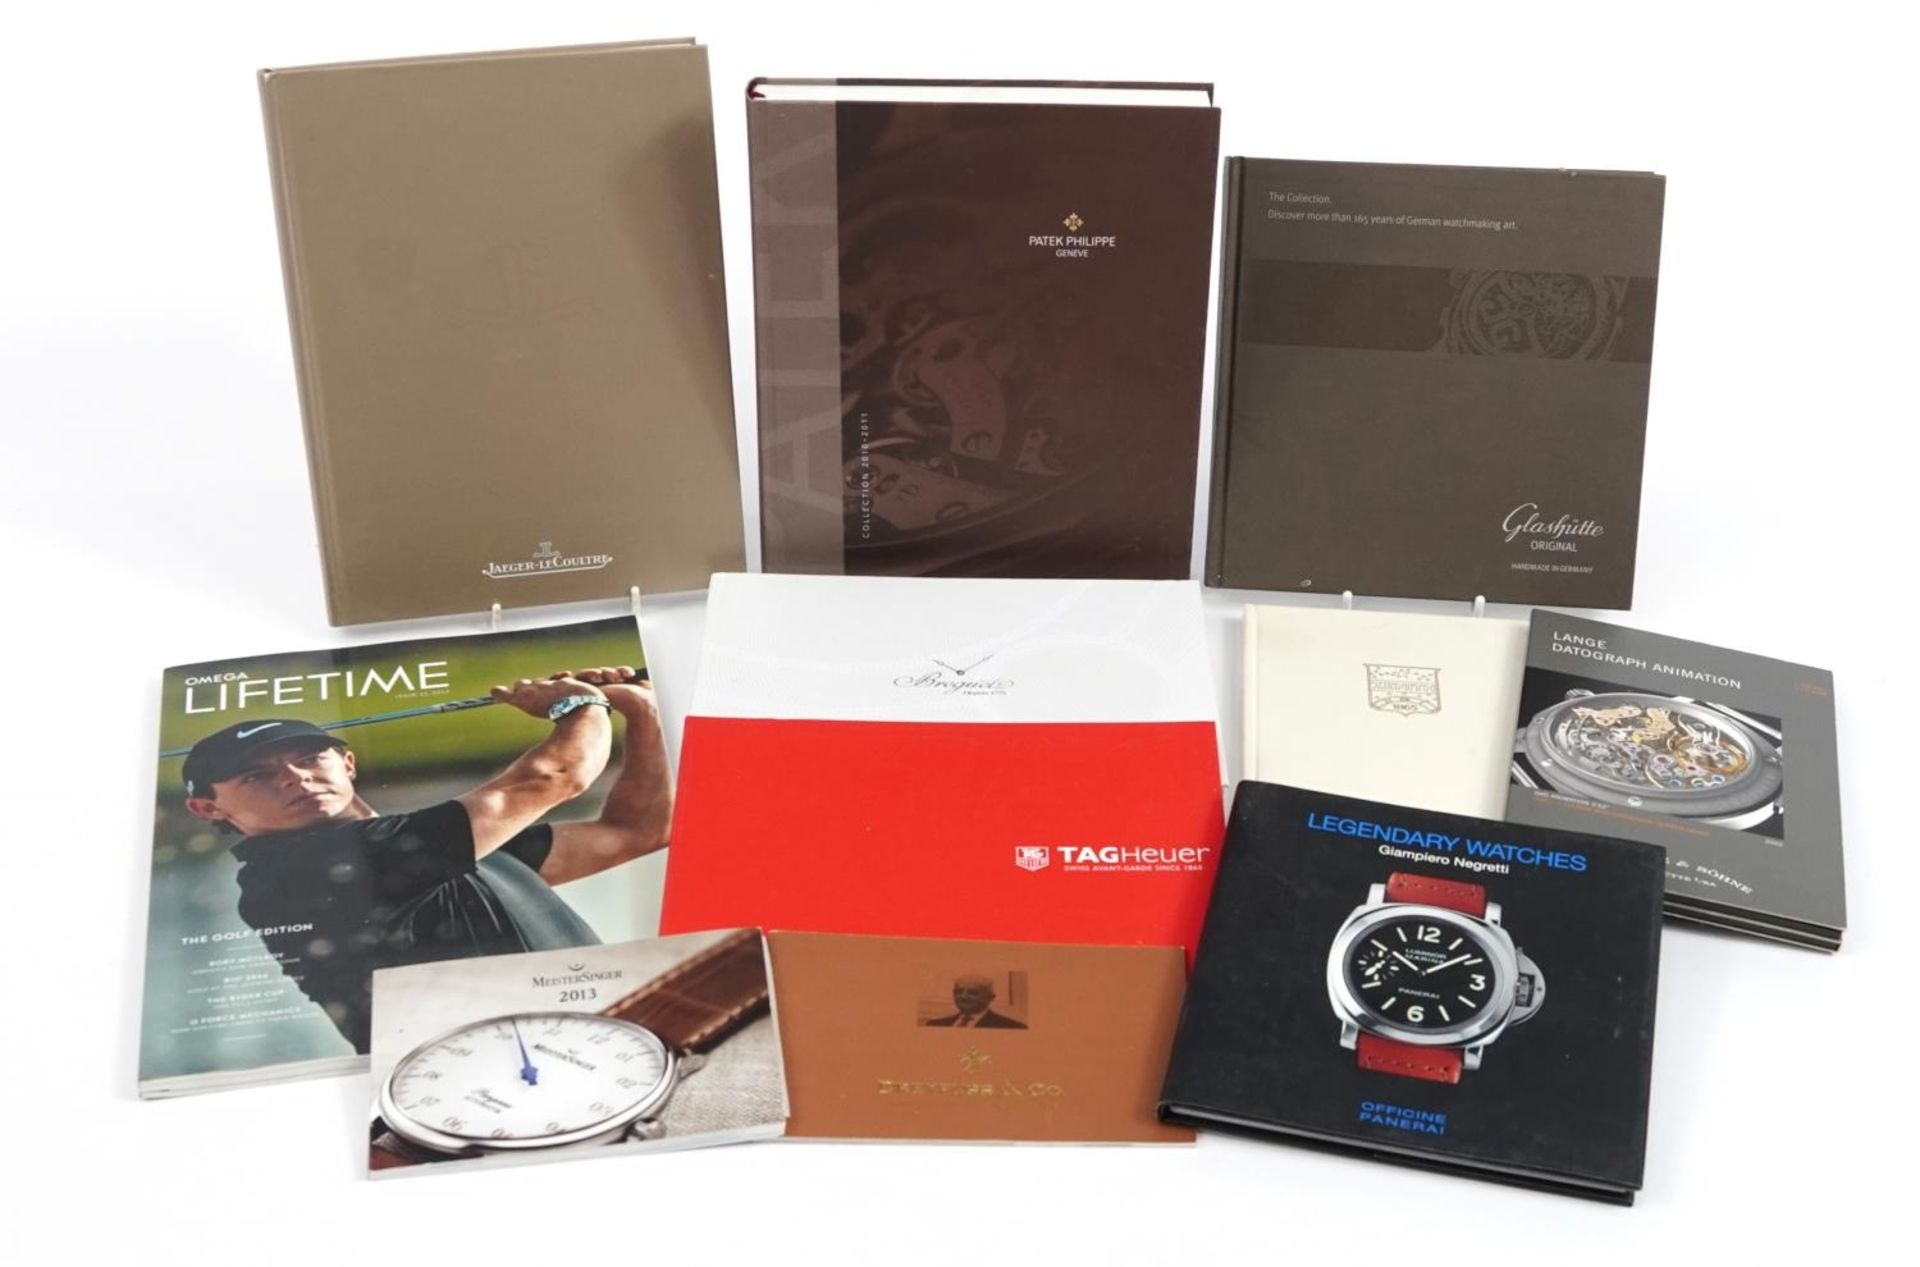 Watch related reference books including Jaeger-LeCoultre, Omega and Patek Philippe